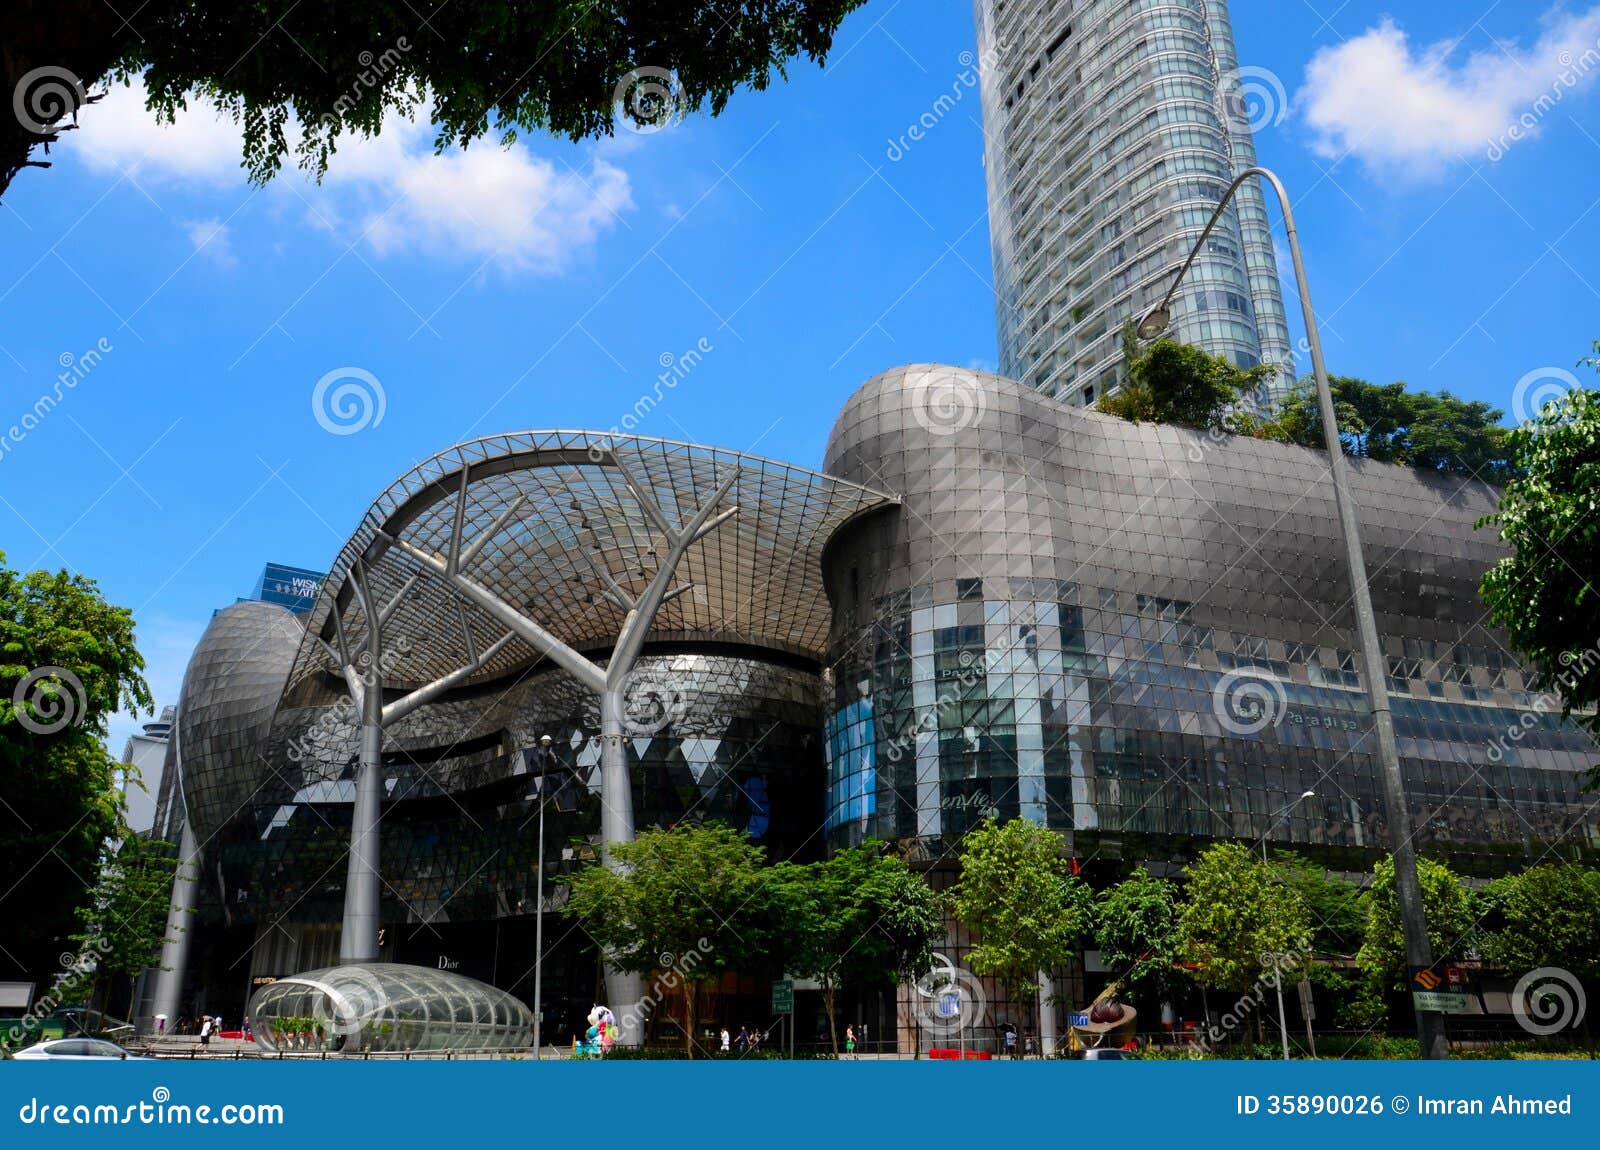 Southeast Asia at Singapore's luxurious ION Orchard in Orchard